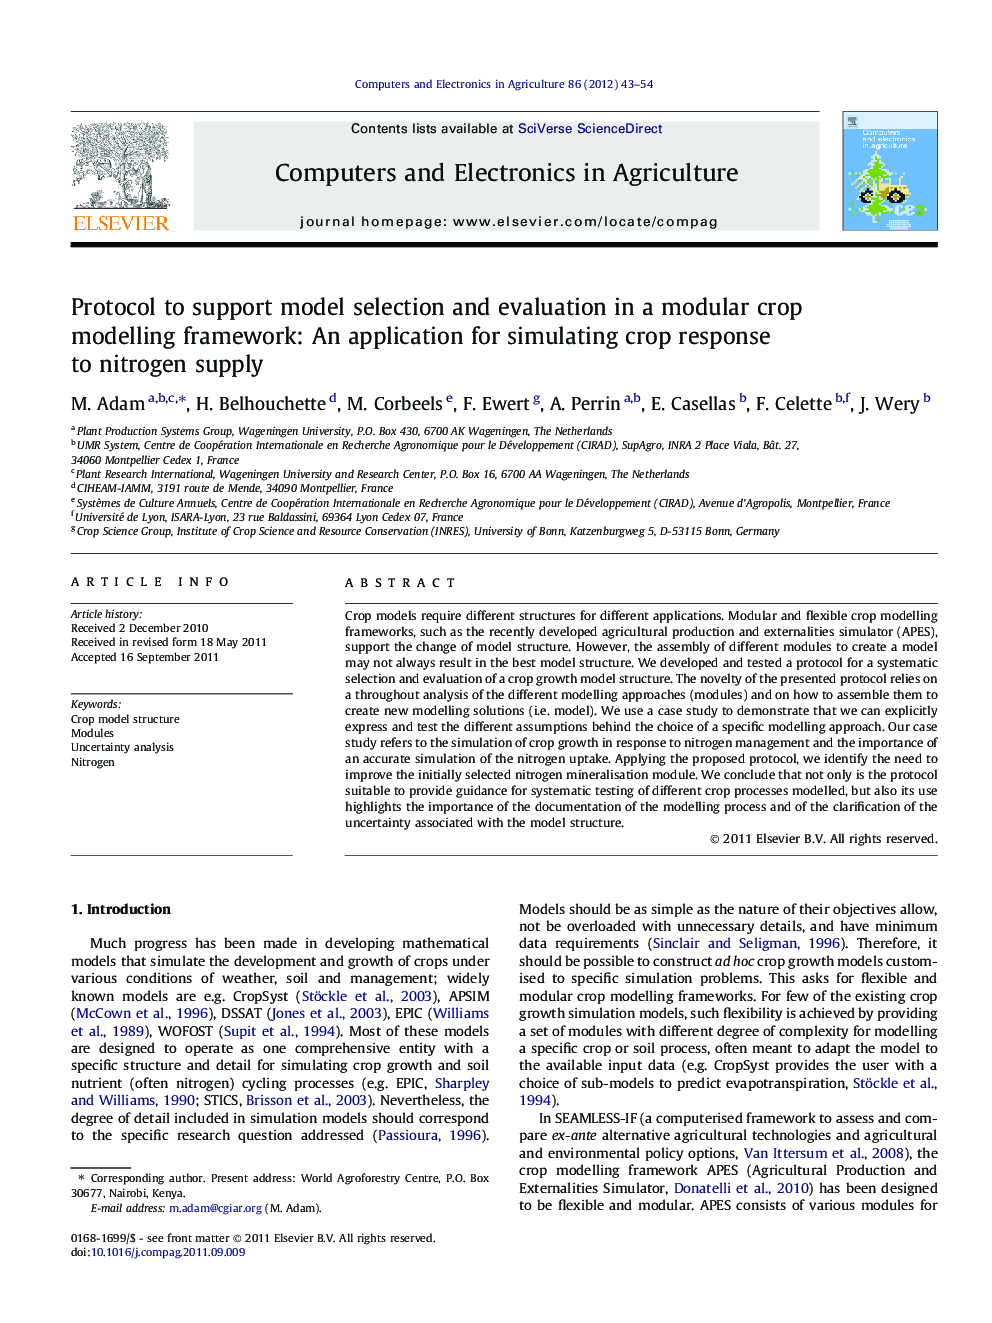 Protocol to support model selection and evaluation in a modular crop modelling framework: An application for simulating crop response to nitrogen supply